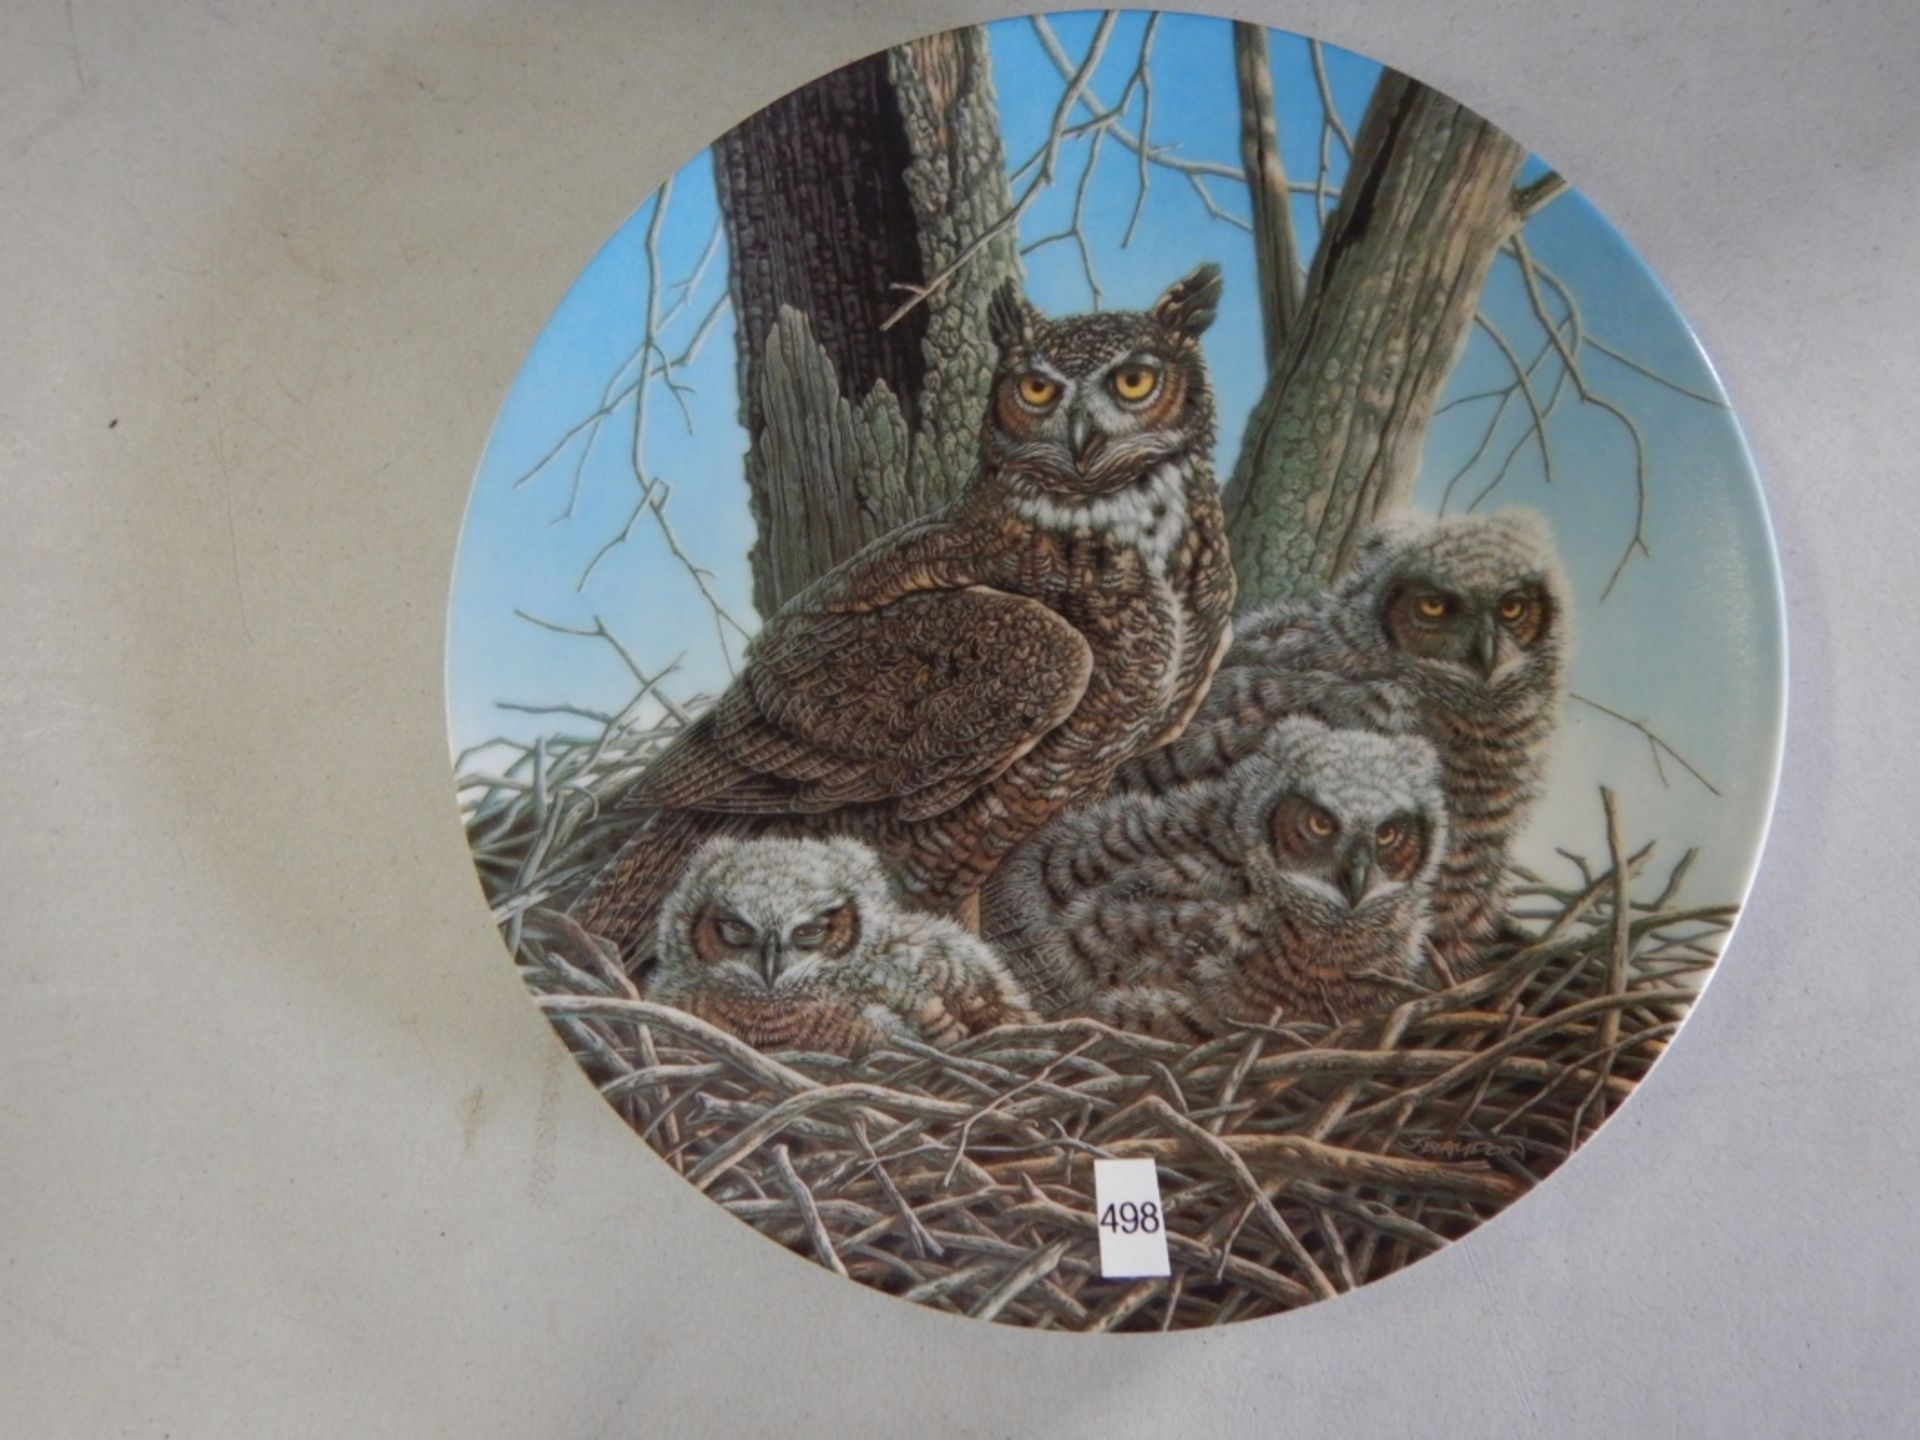 COLLECTOR PLATES BY JIM BEAUDOIN - SET OF 2 - OWLS #9605B - "THE BARN OWL", #15692C - "THE GREAT - Image 6 of 9